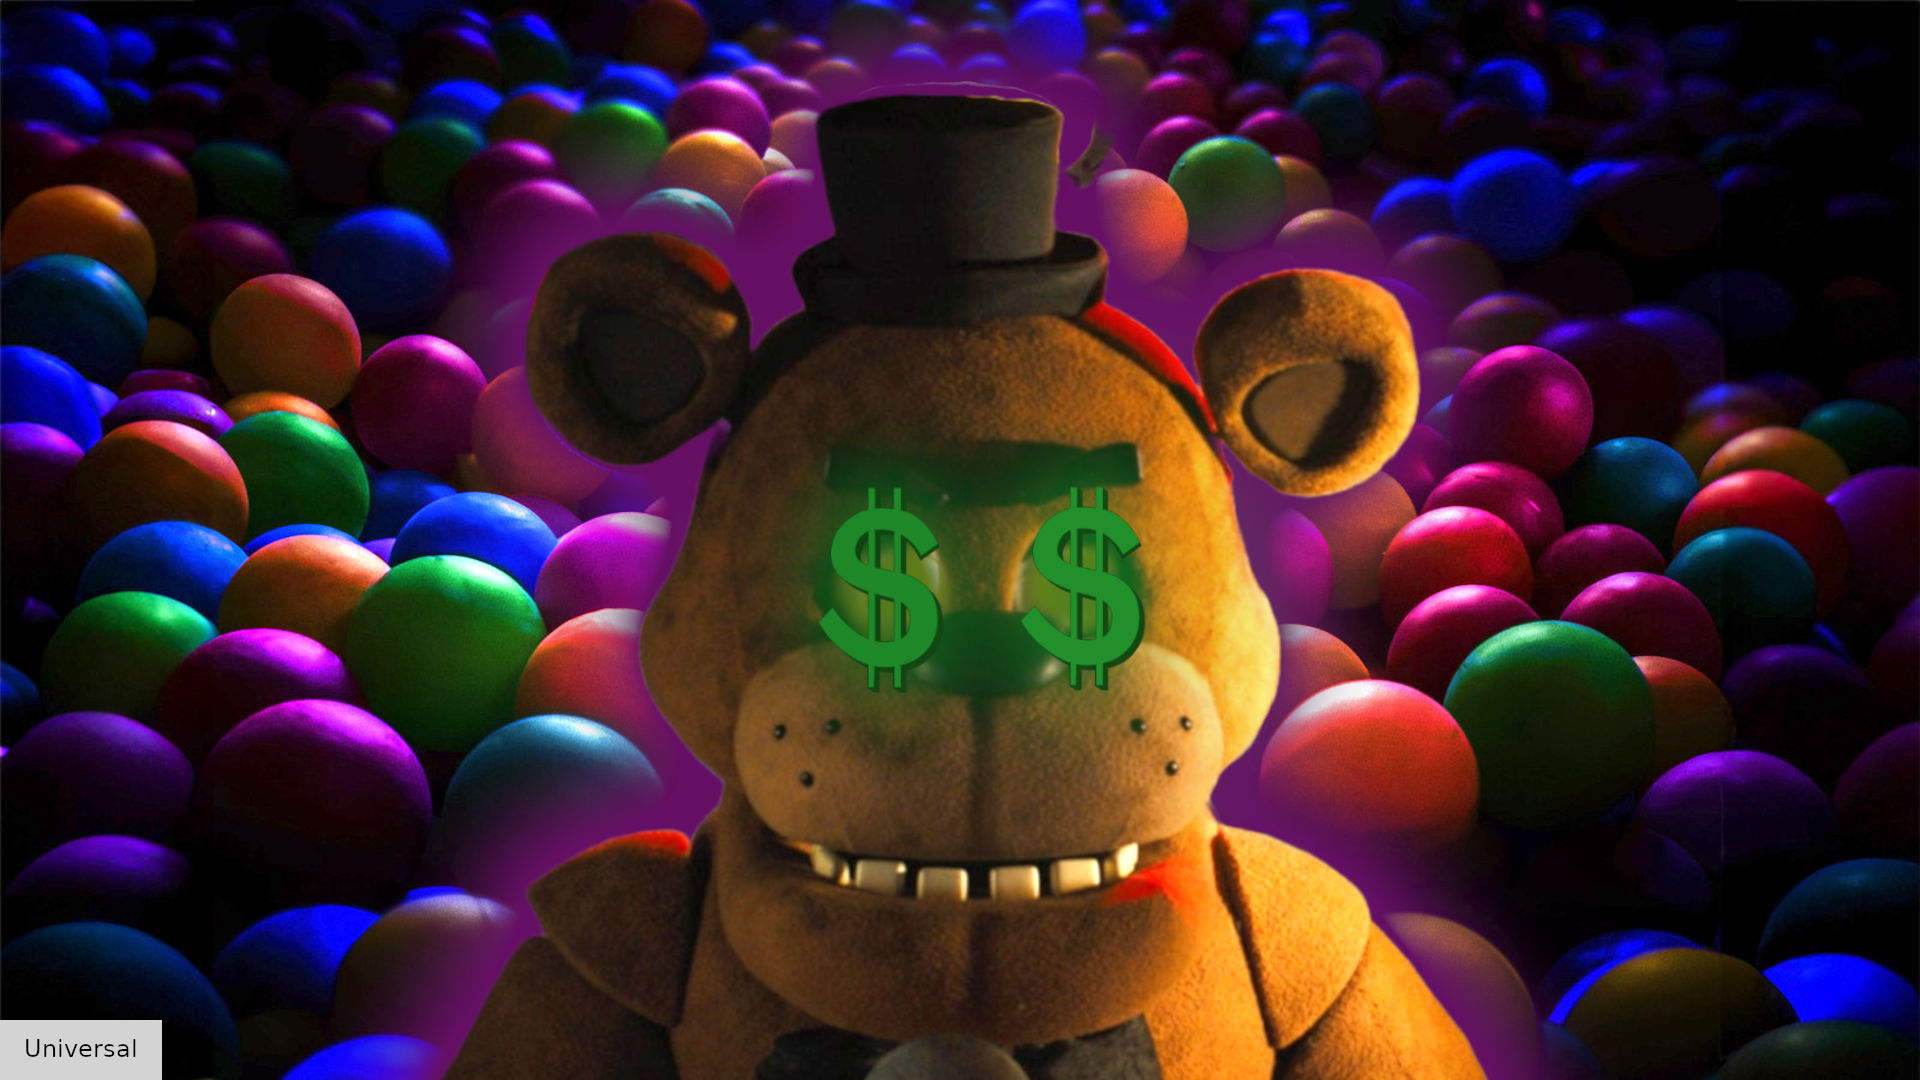 Five Nights at Freddy's Sets New Box Office Record